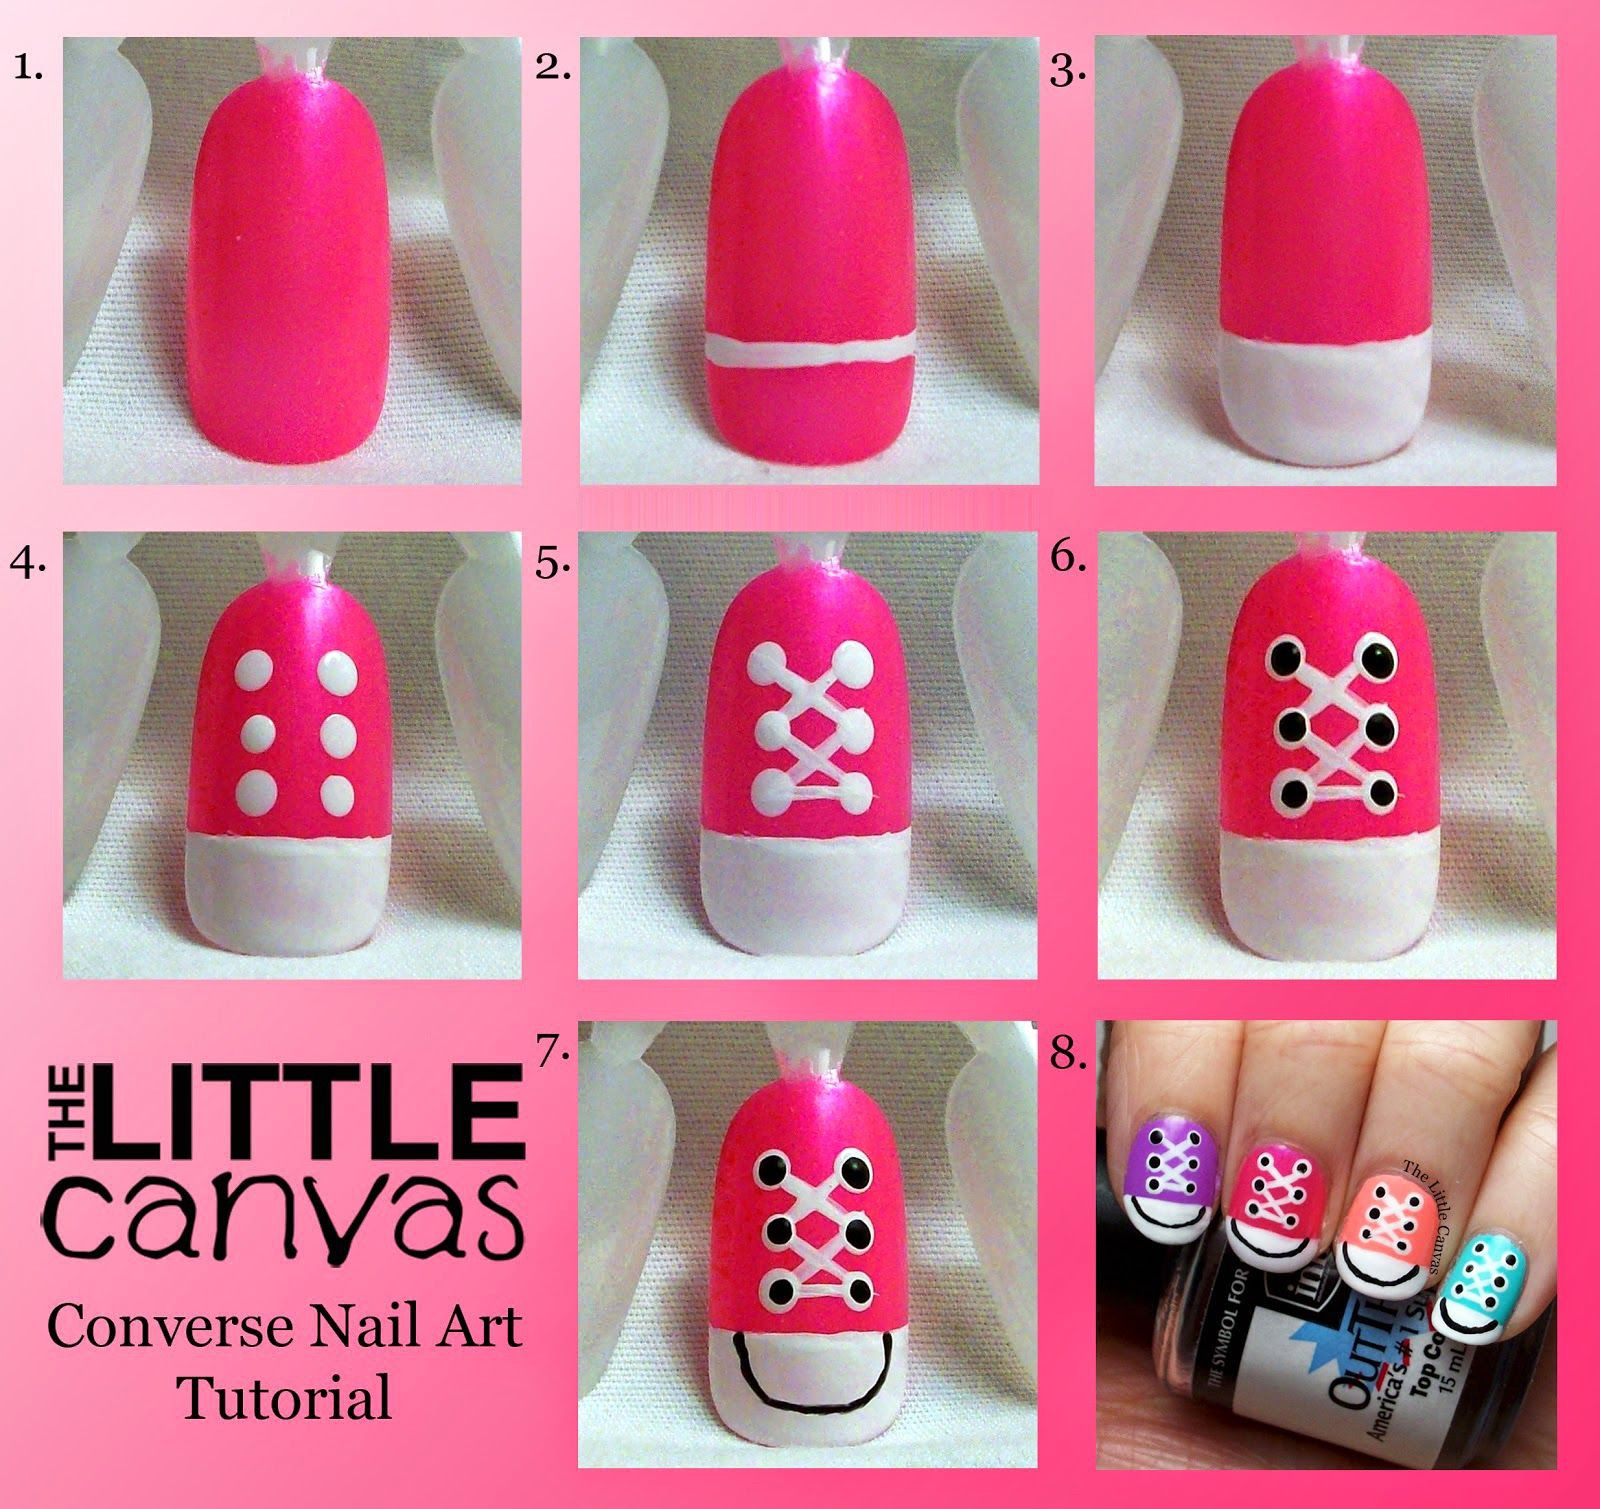 Nail Art Images Step By Step
 Converse Nail Art Step By Step Entertainment News